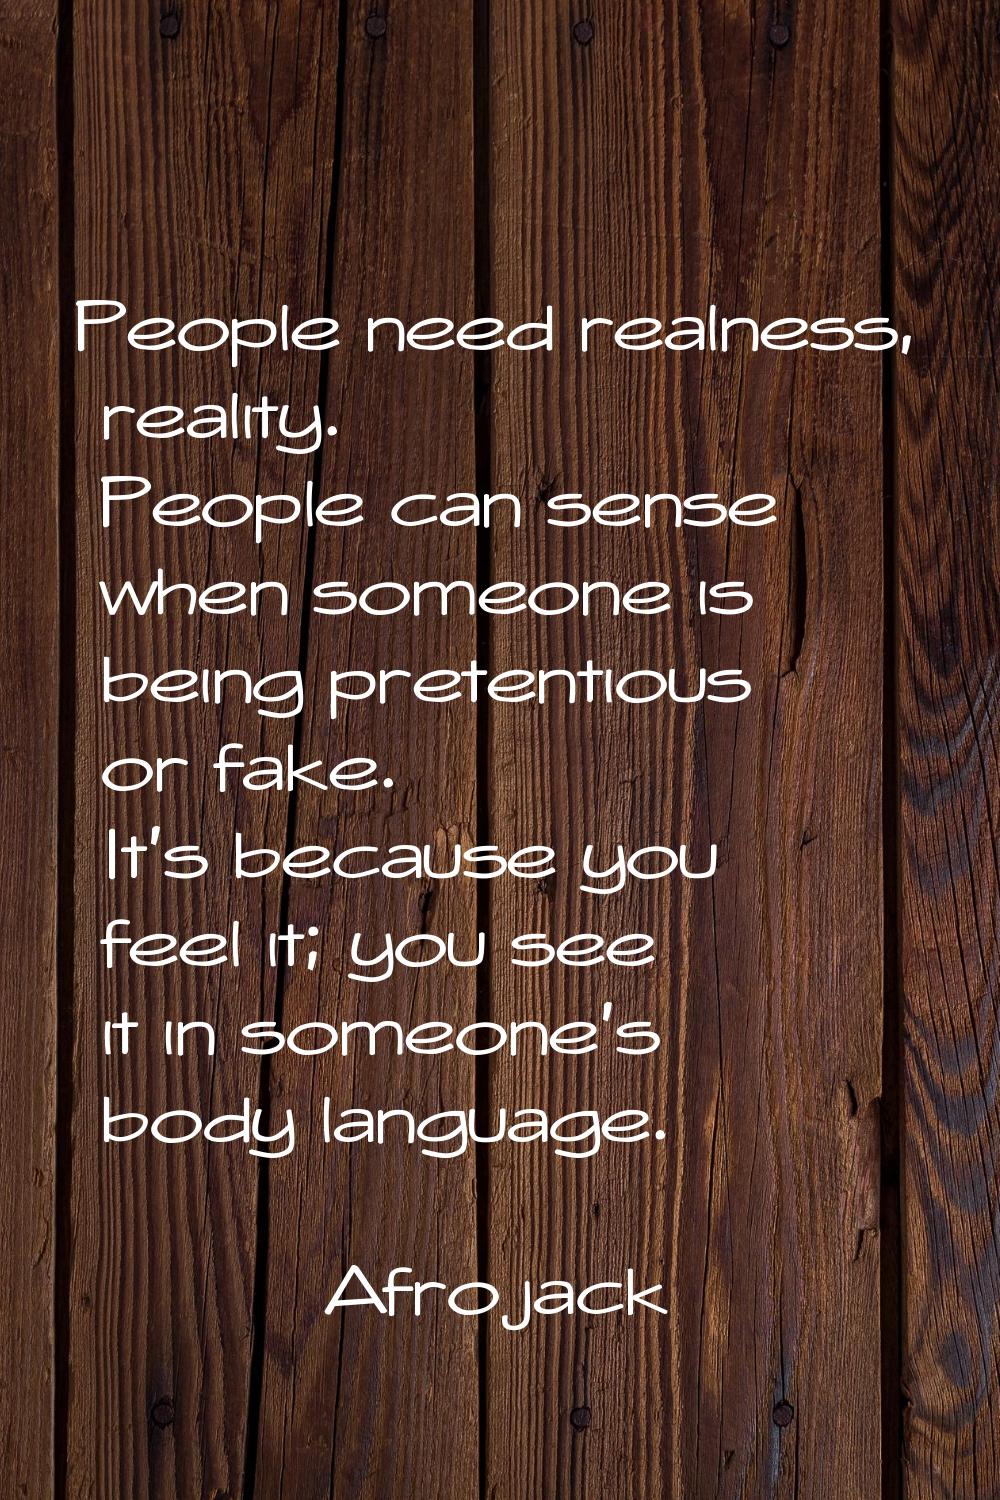 People need realness, reality. People can sense when someone is being pretentious or fake. It's bec